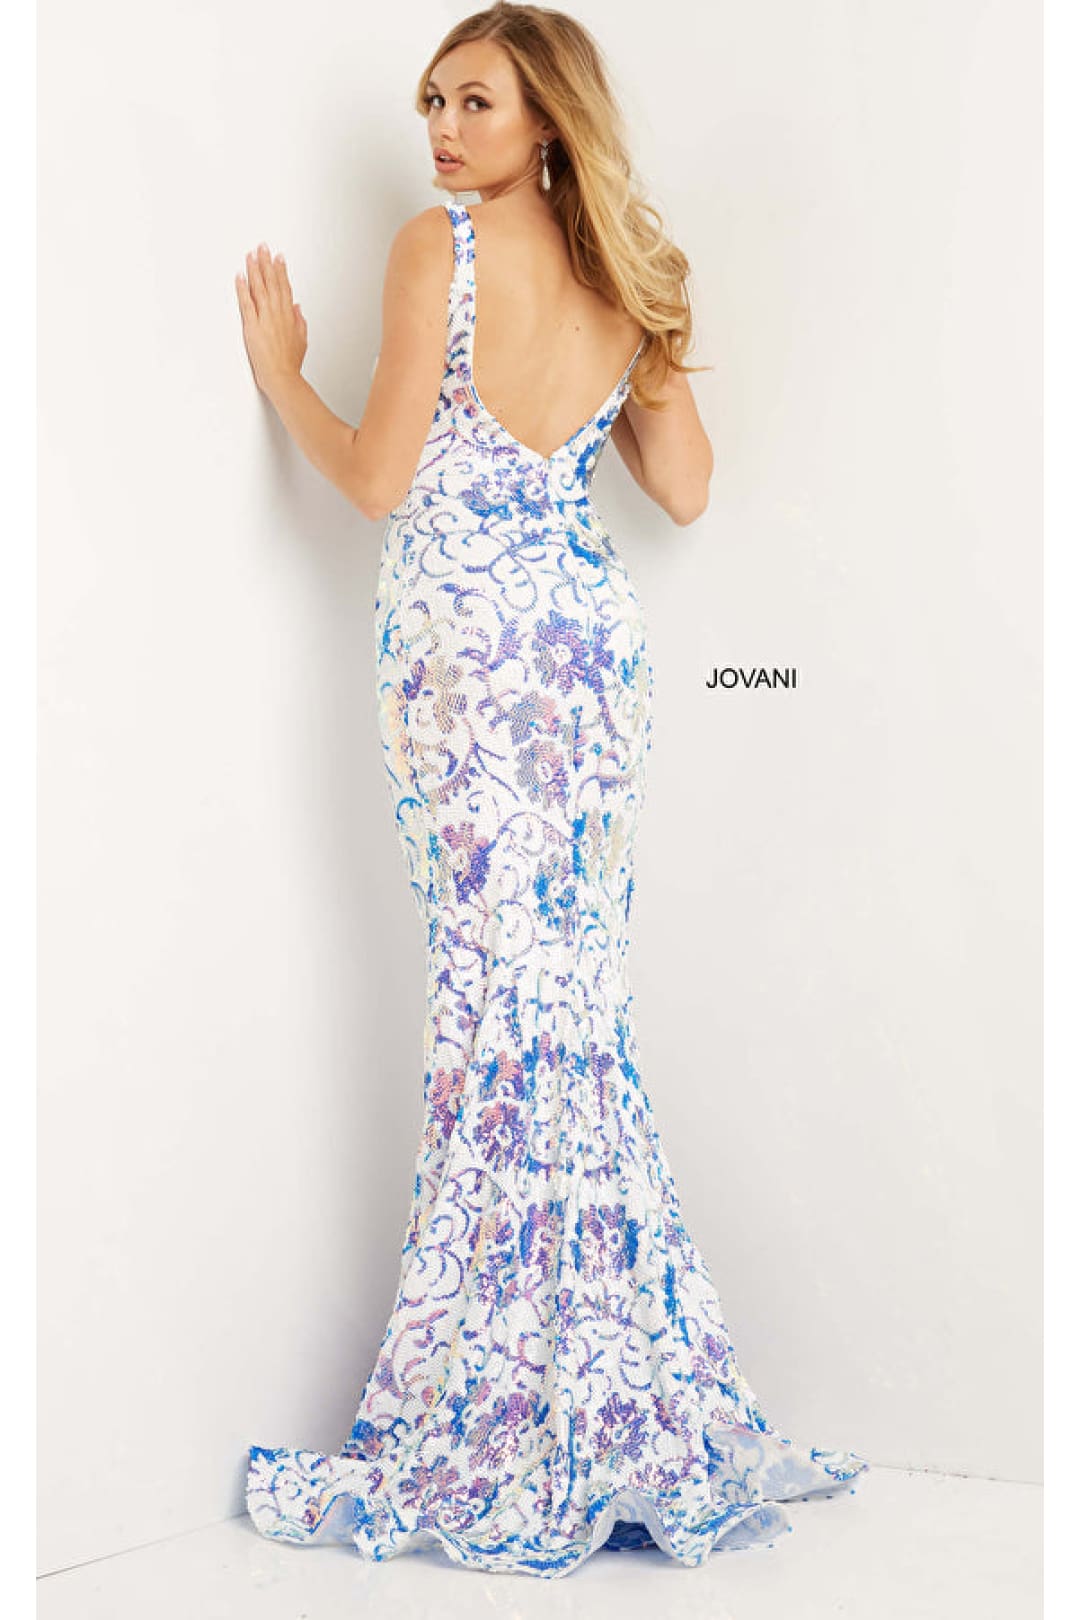 Jovani 08257 Floral Sequin Fitted Scoop Back Mermaid Evening Gown - Dress